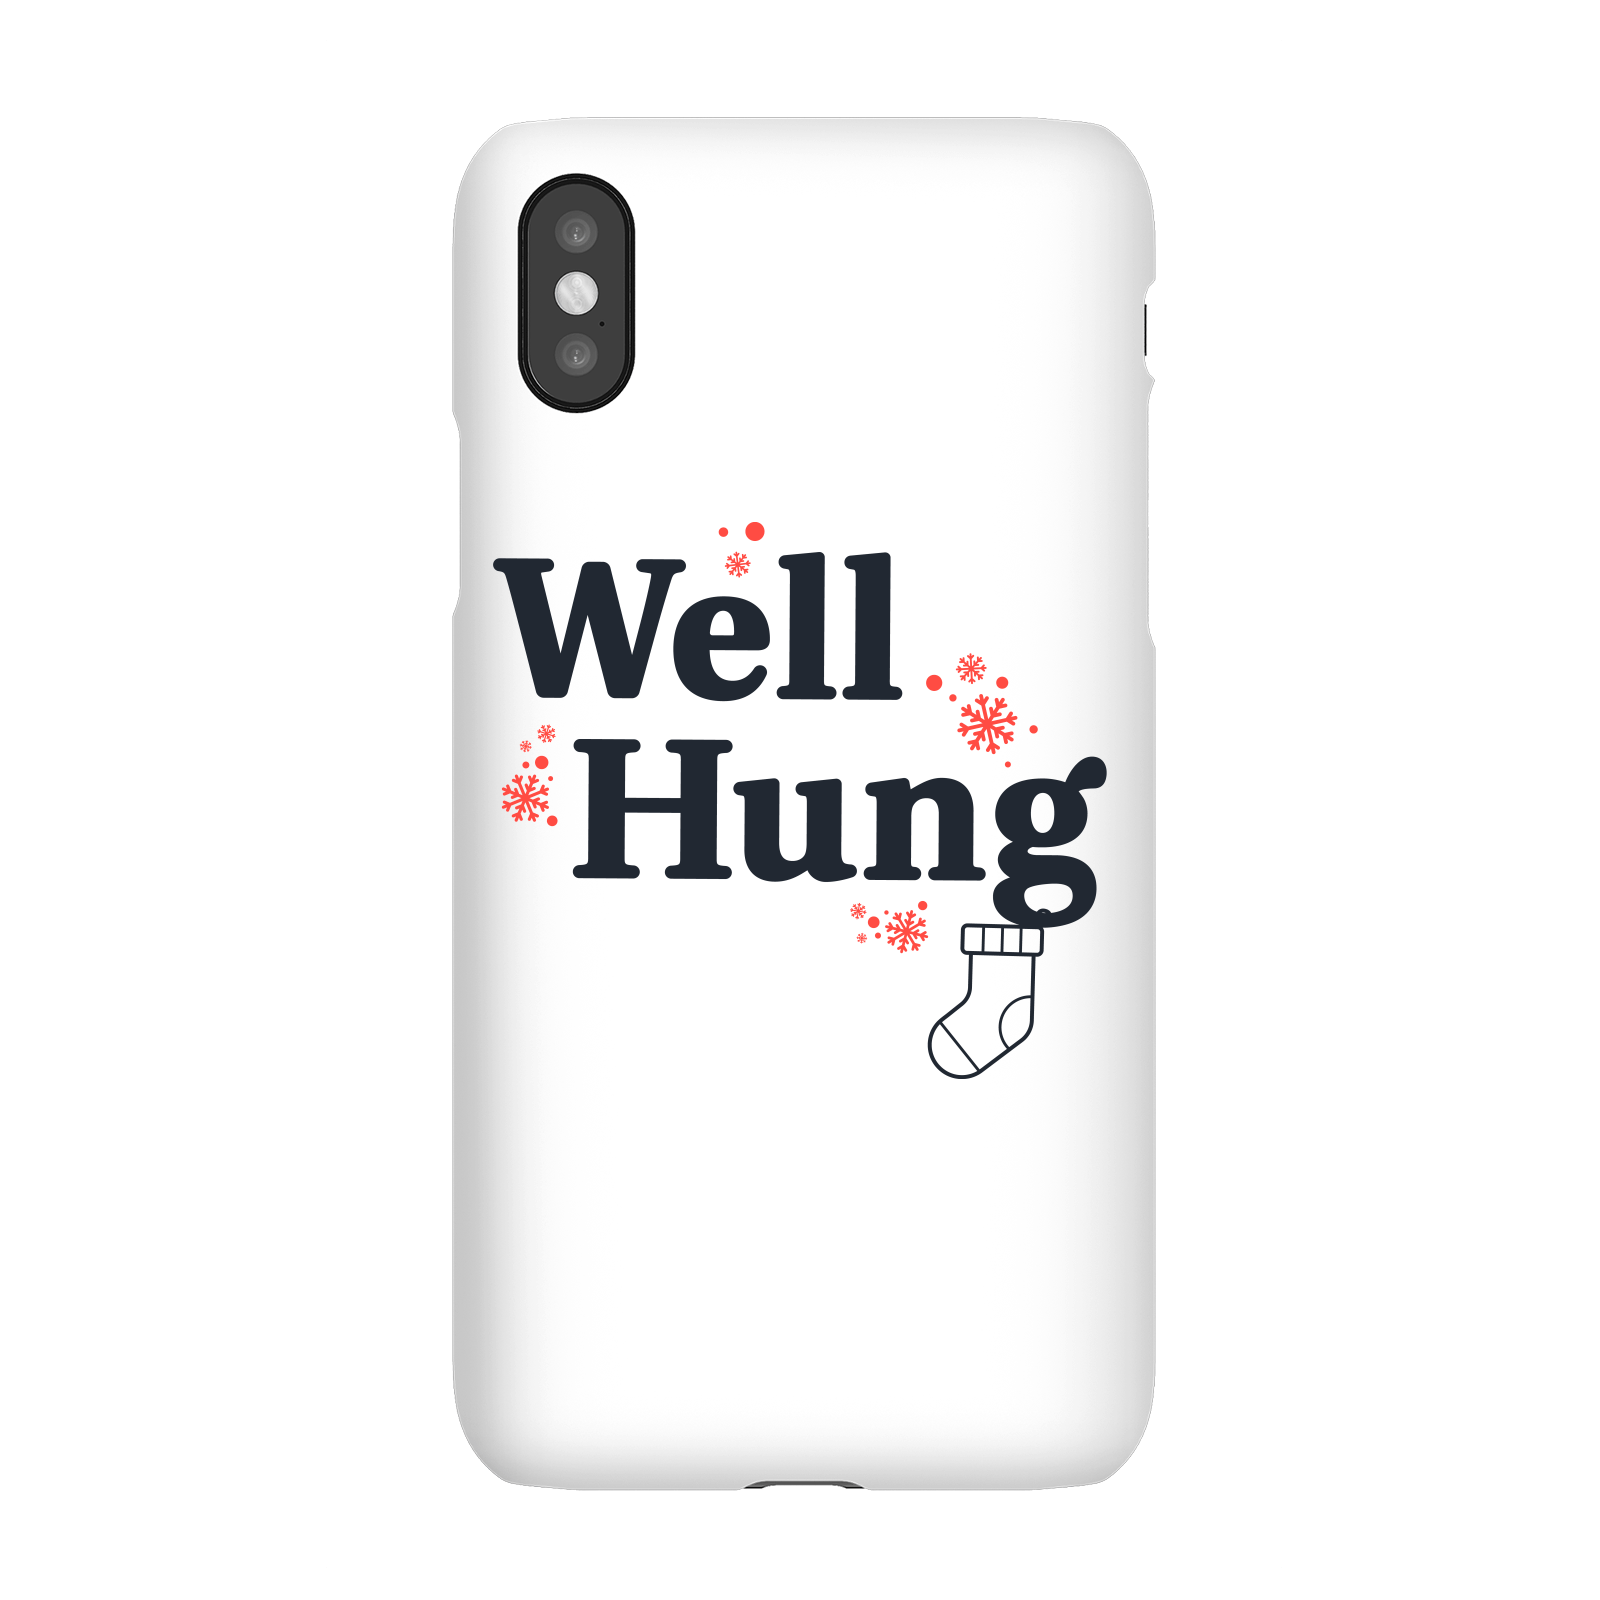 Well Hung Phone Case for iPhone and Android - iPhone 5/5s - Snap Case - Matte